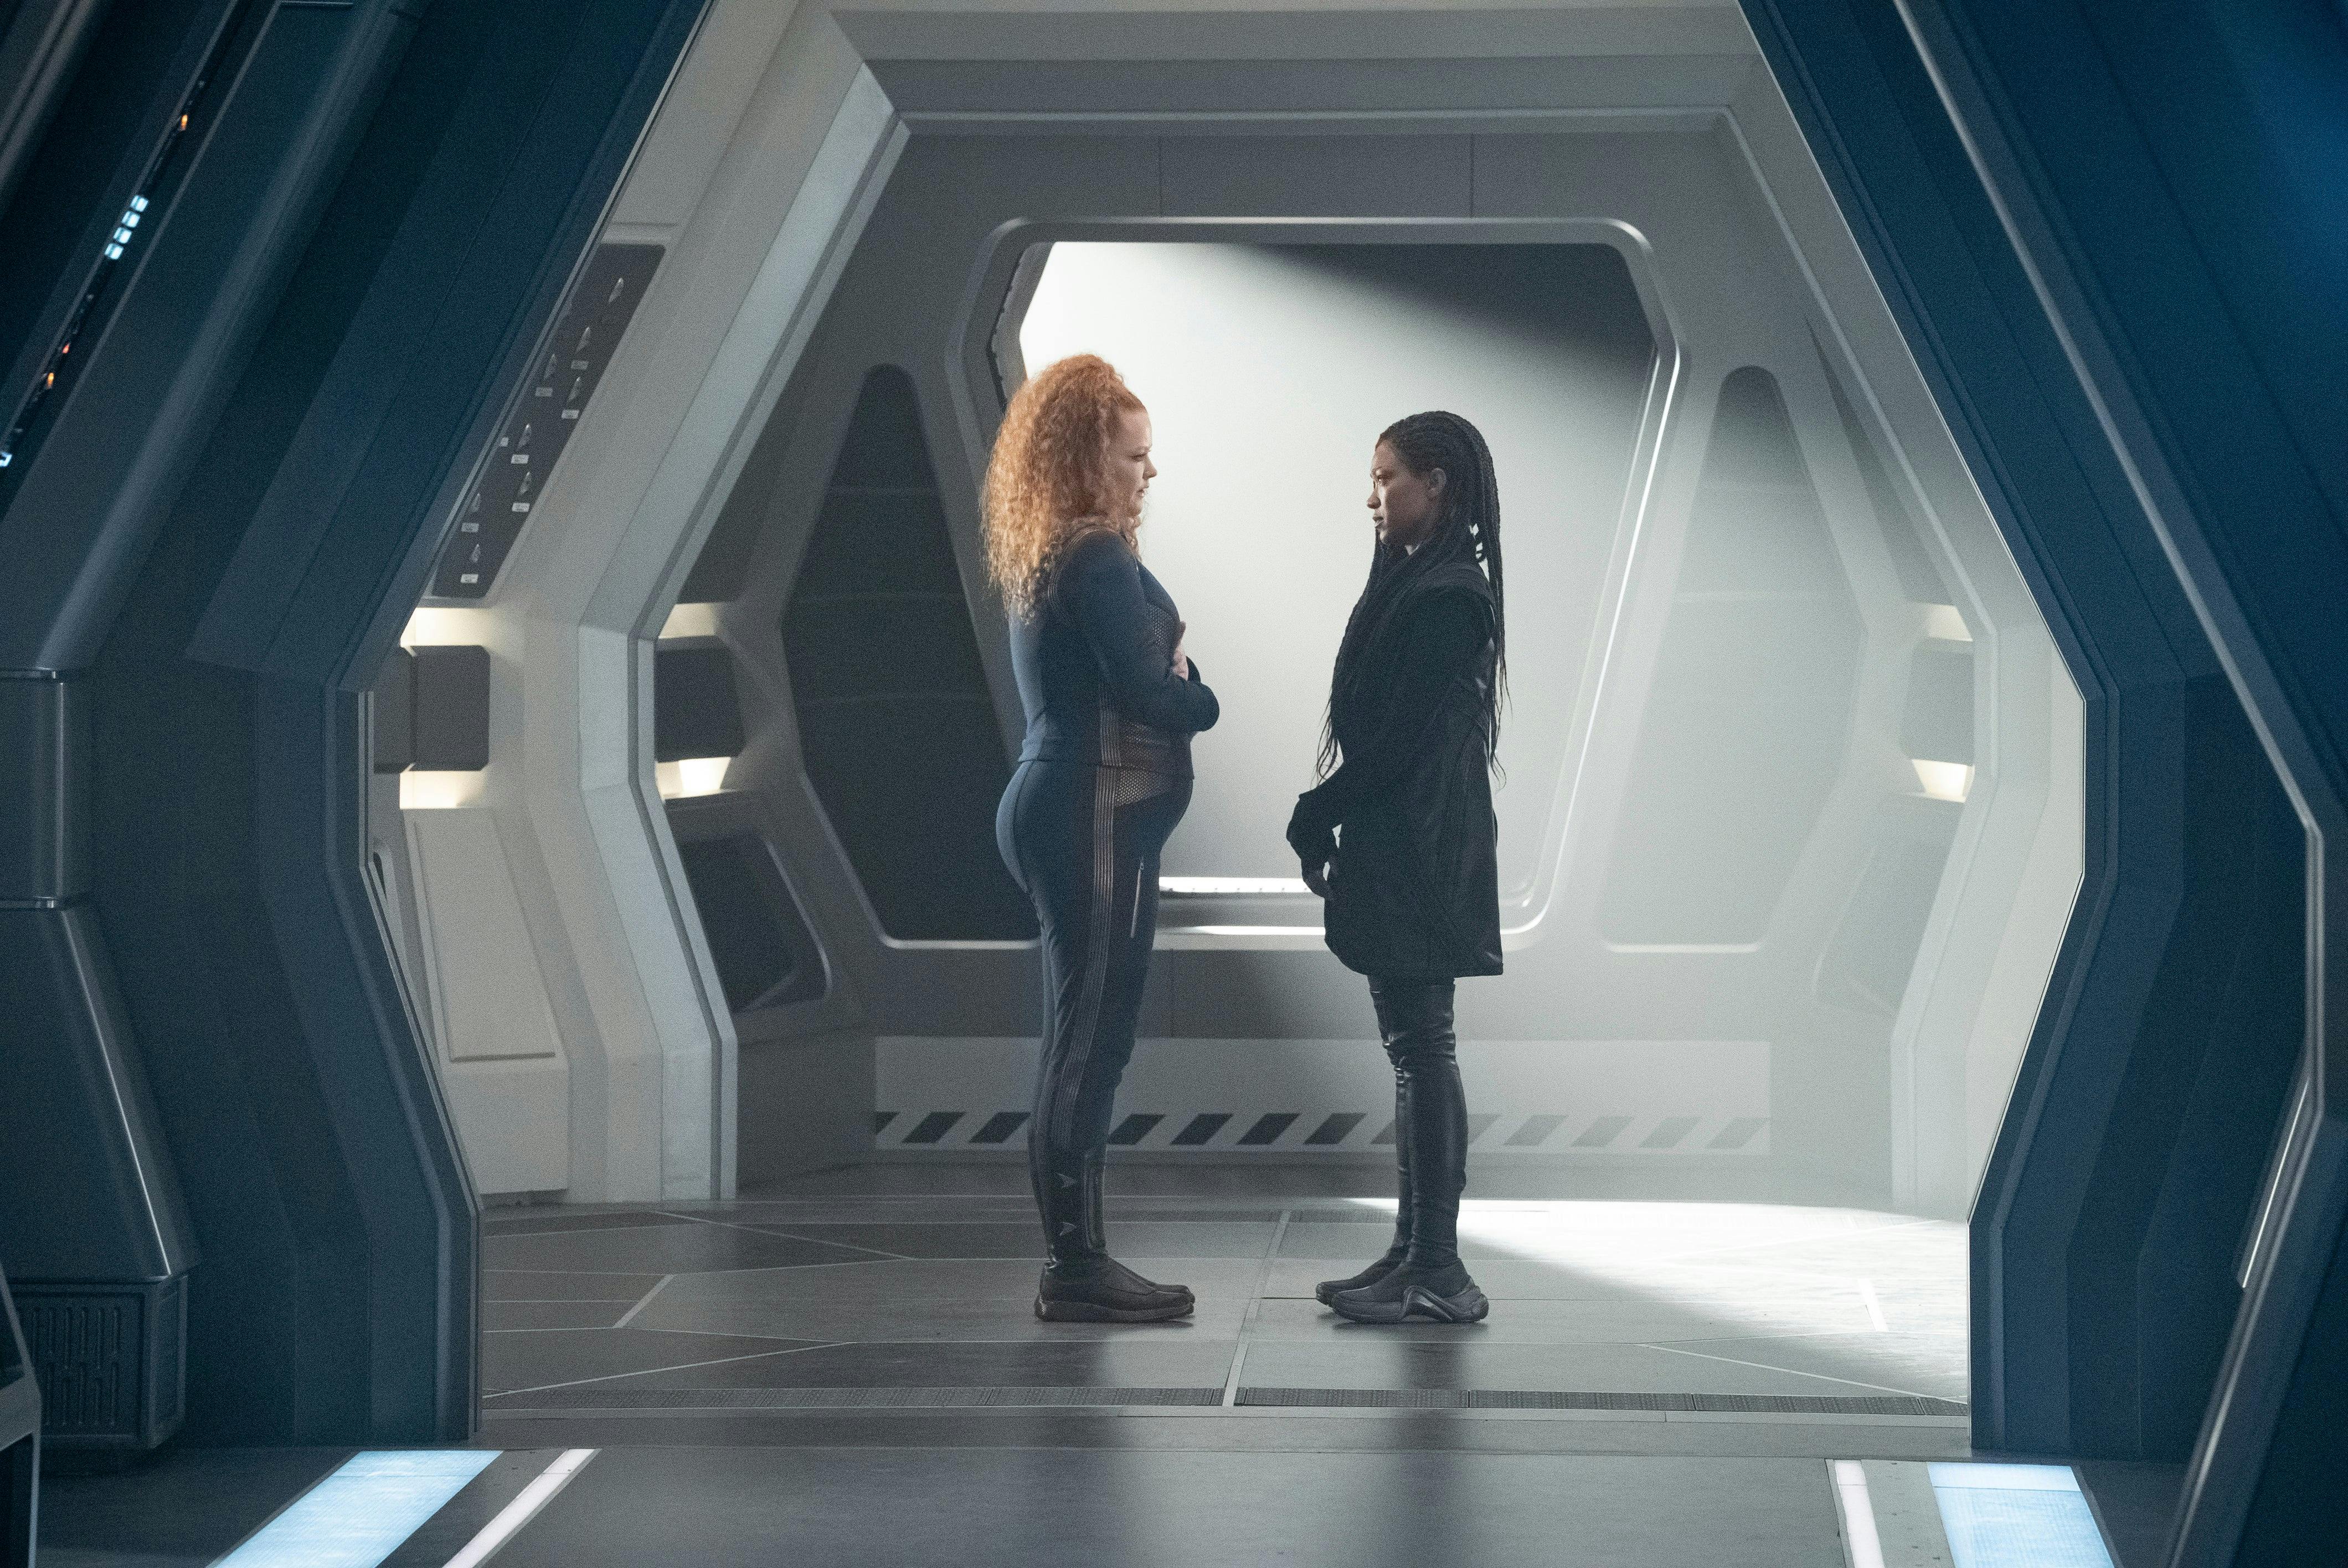 Star Trek: Discovery - "People of Earth"